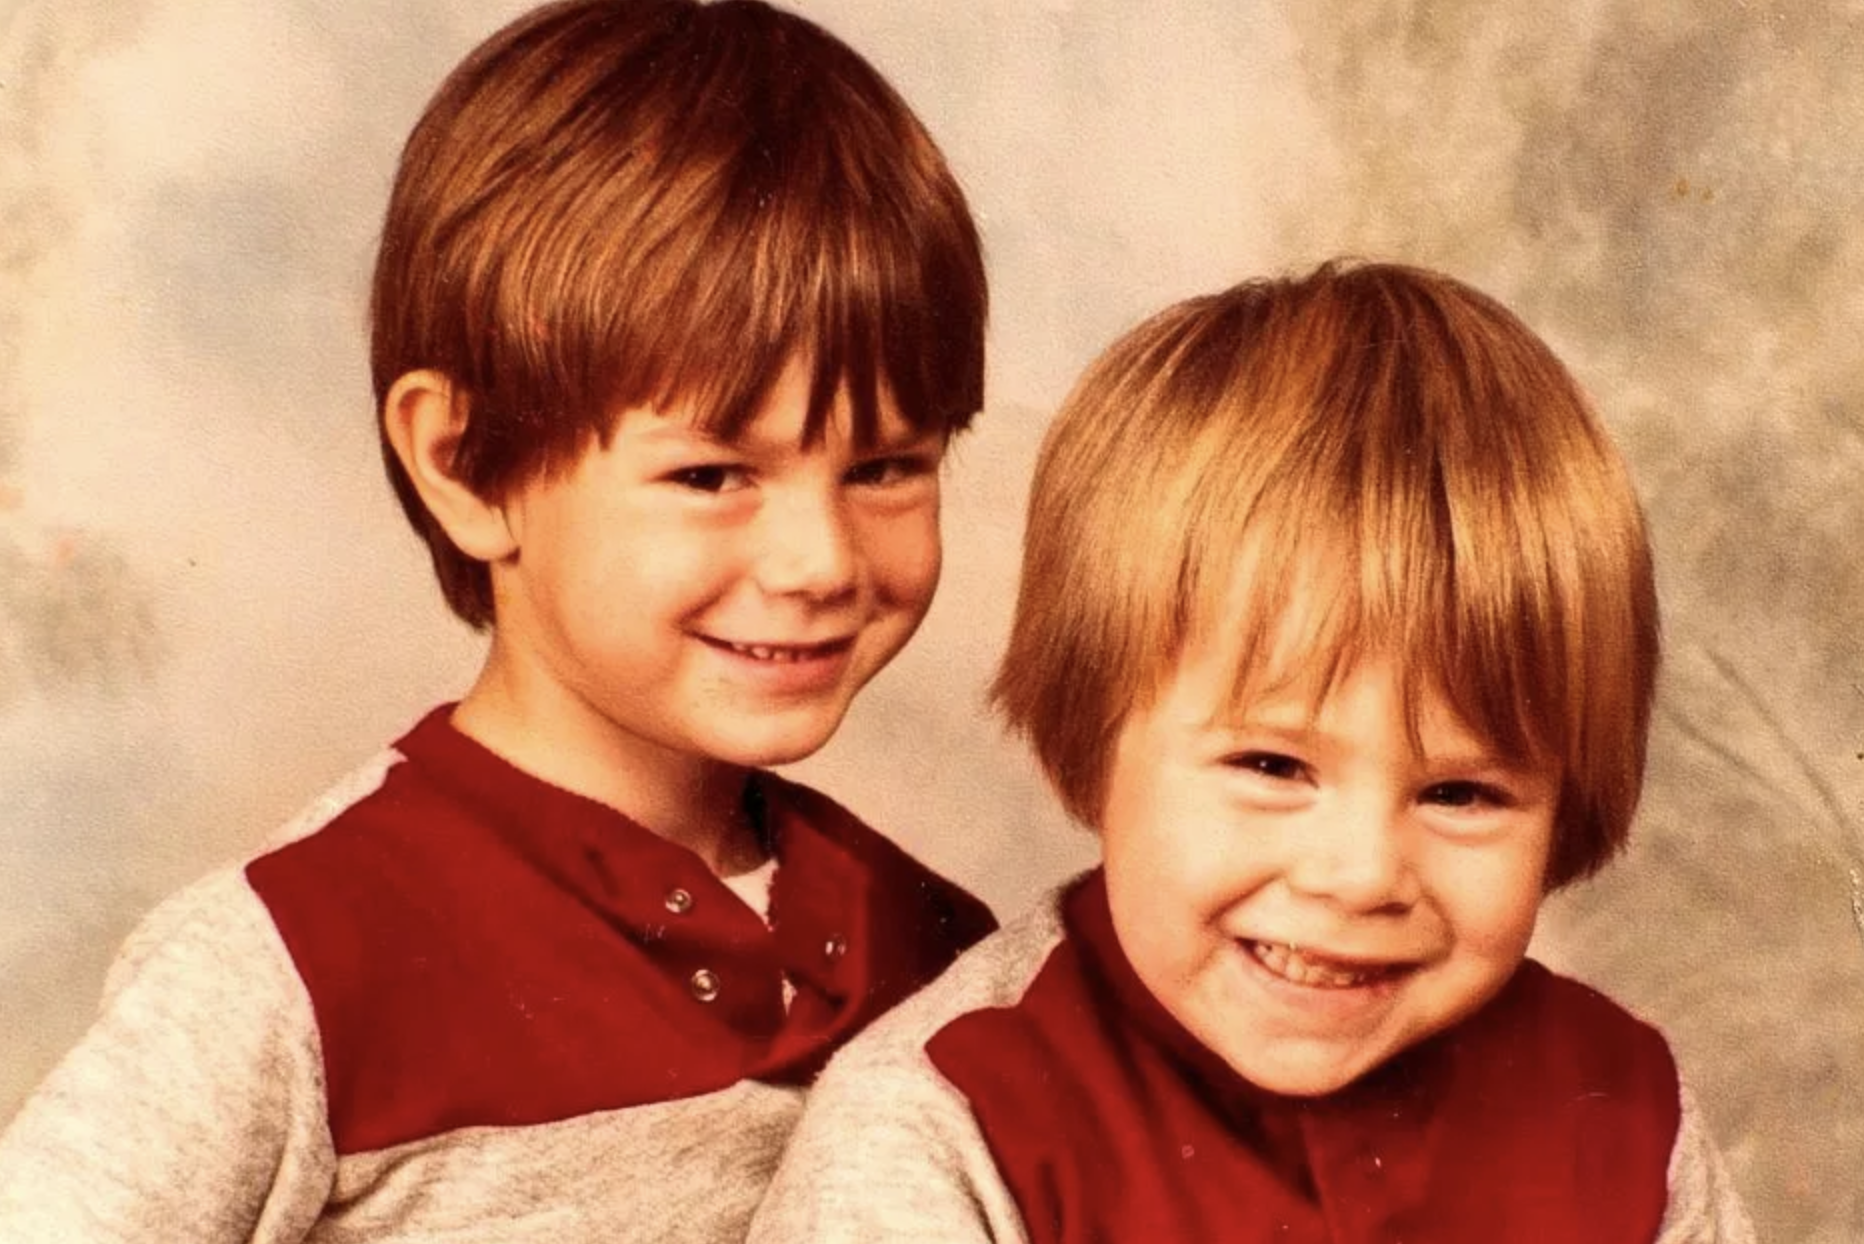 Danny Dyer as a child with his brother, Tony